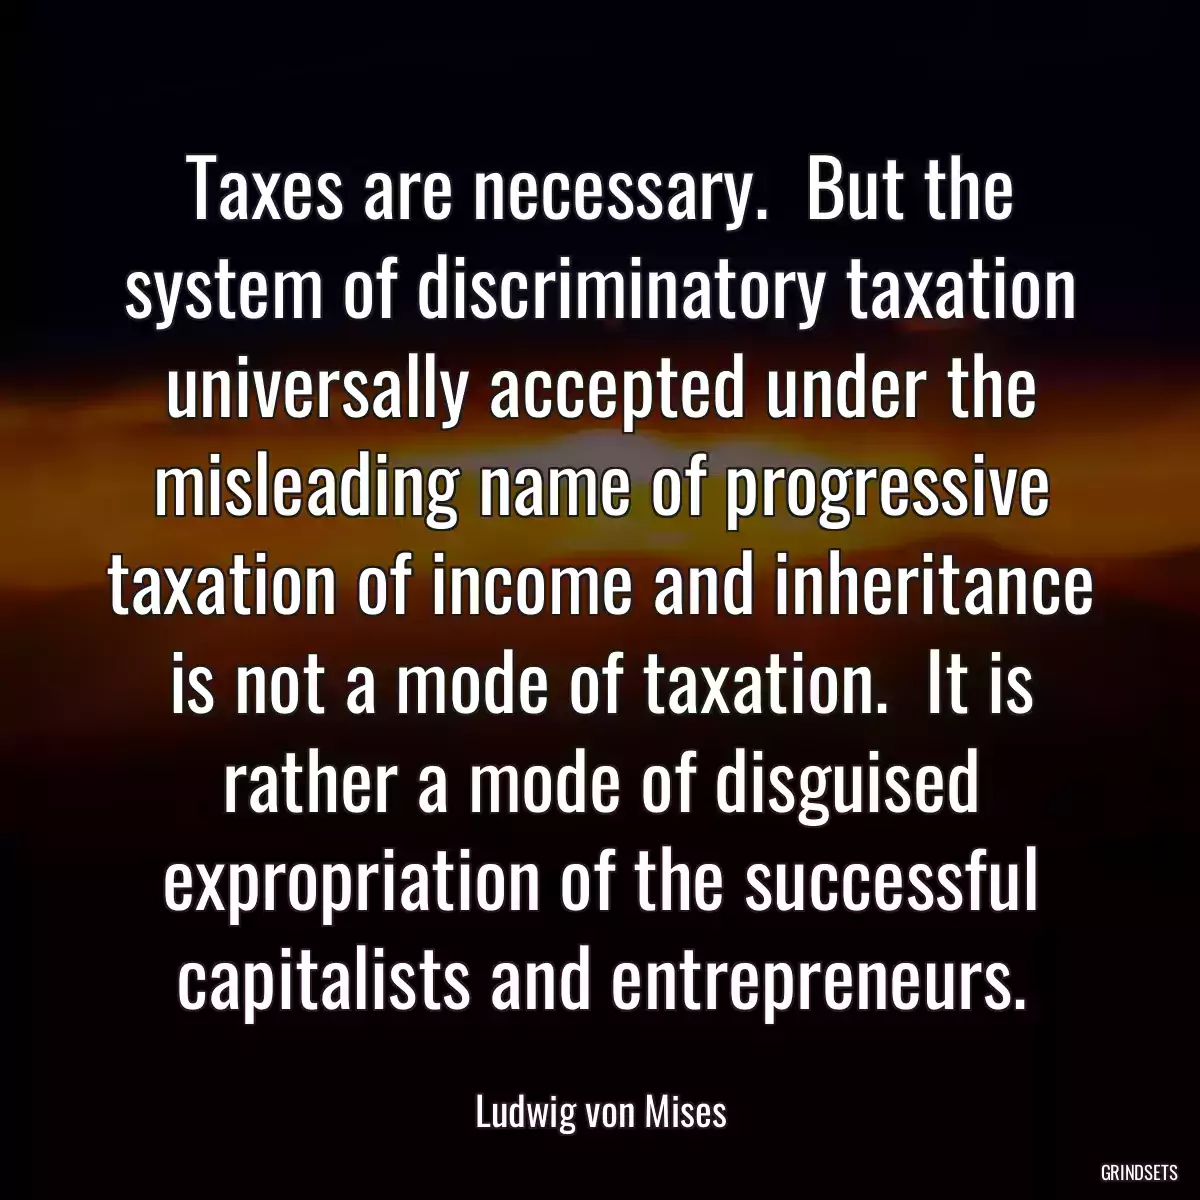 Taxes are necessary.  But the system of discriminatory taxation universally accepted under the misleading name of progressive taxation of income and inheritance is not a mode of taxation.  It is rather a mode of disguised expropriation of the successful capitalists and entrepreneurs.